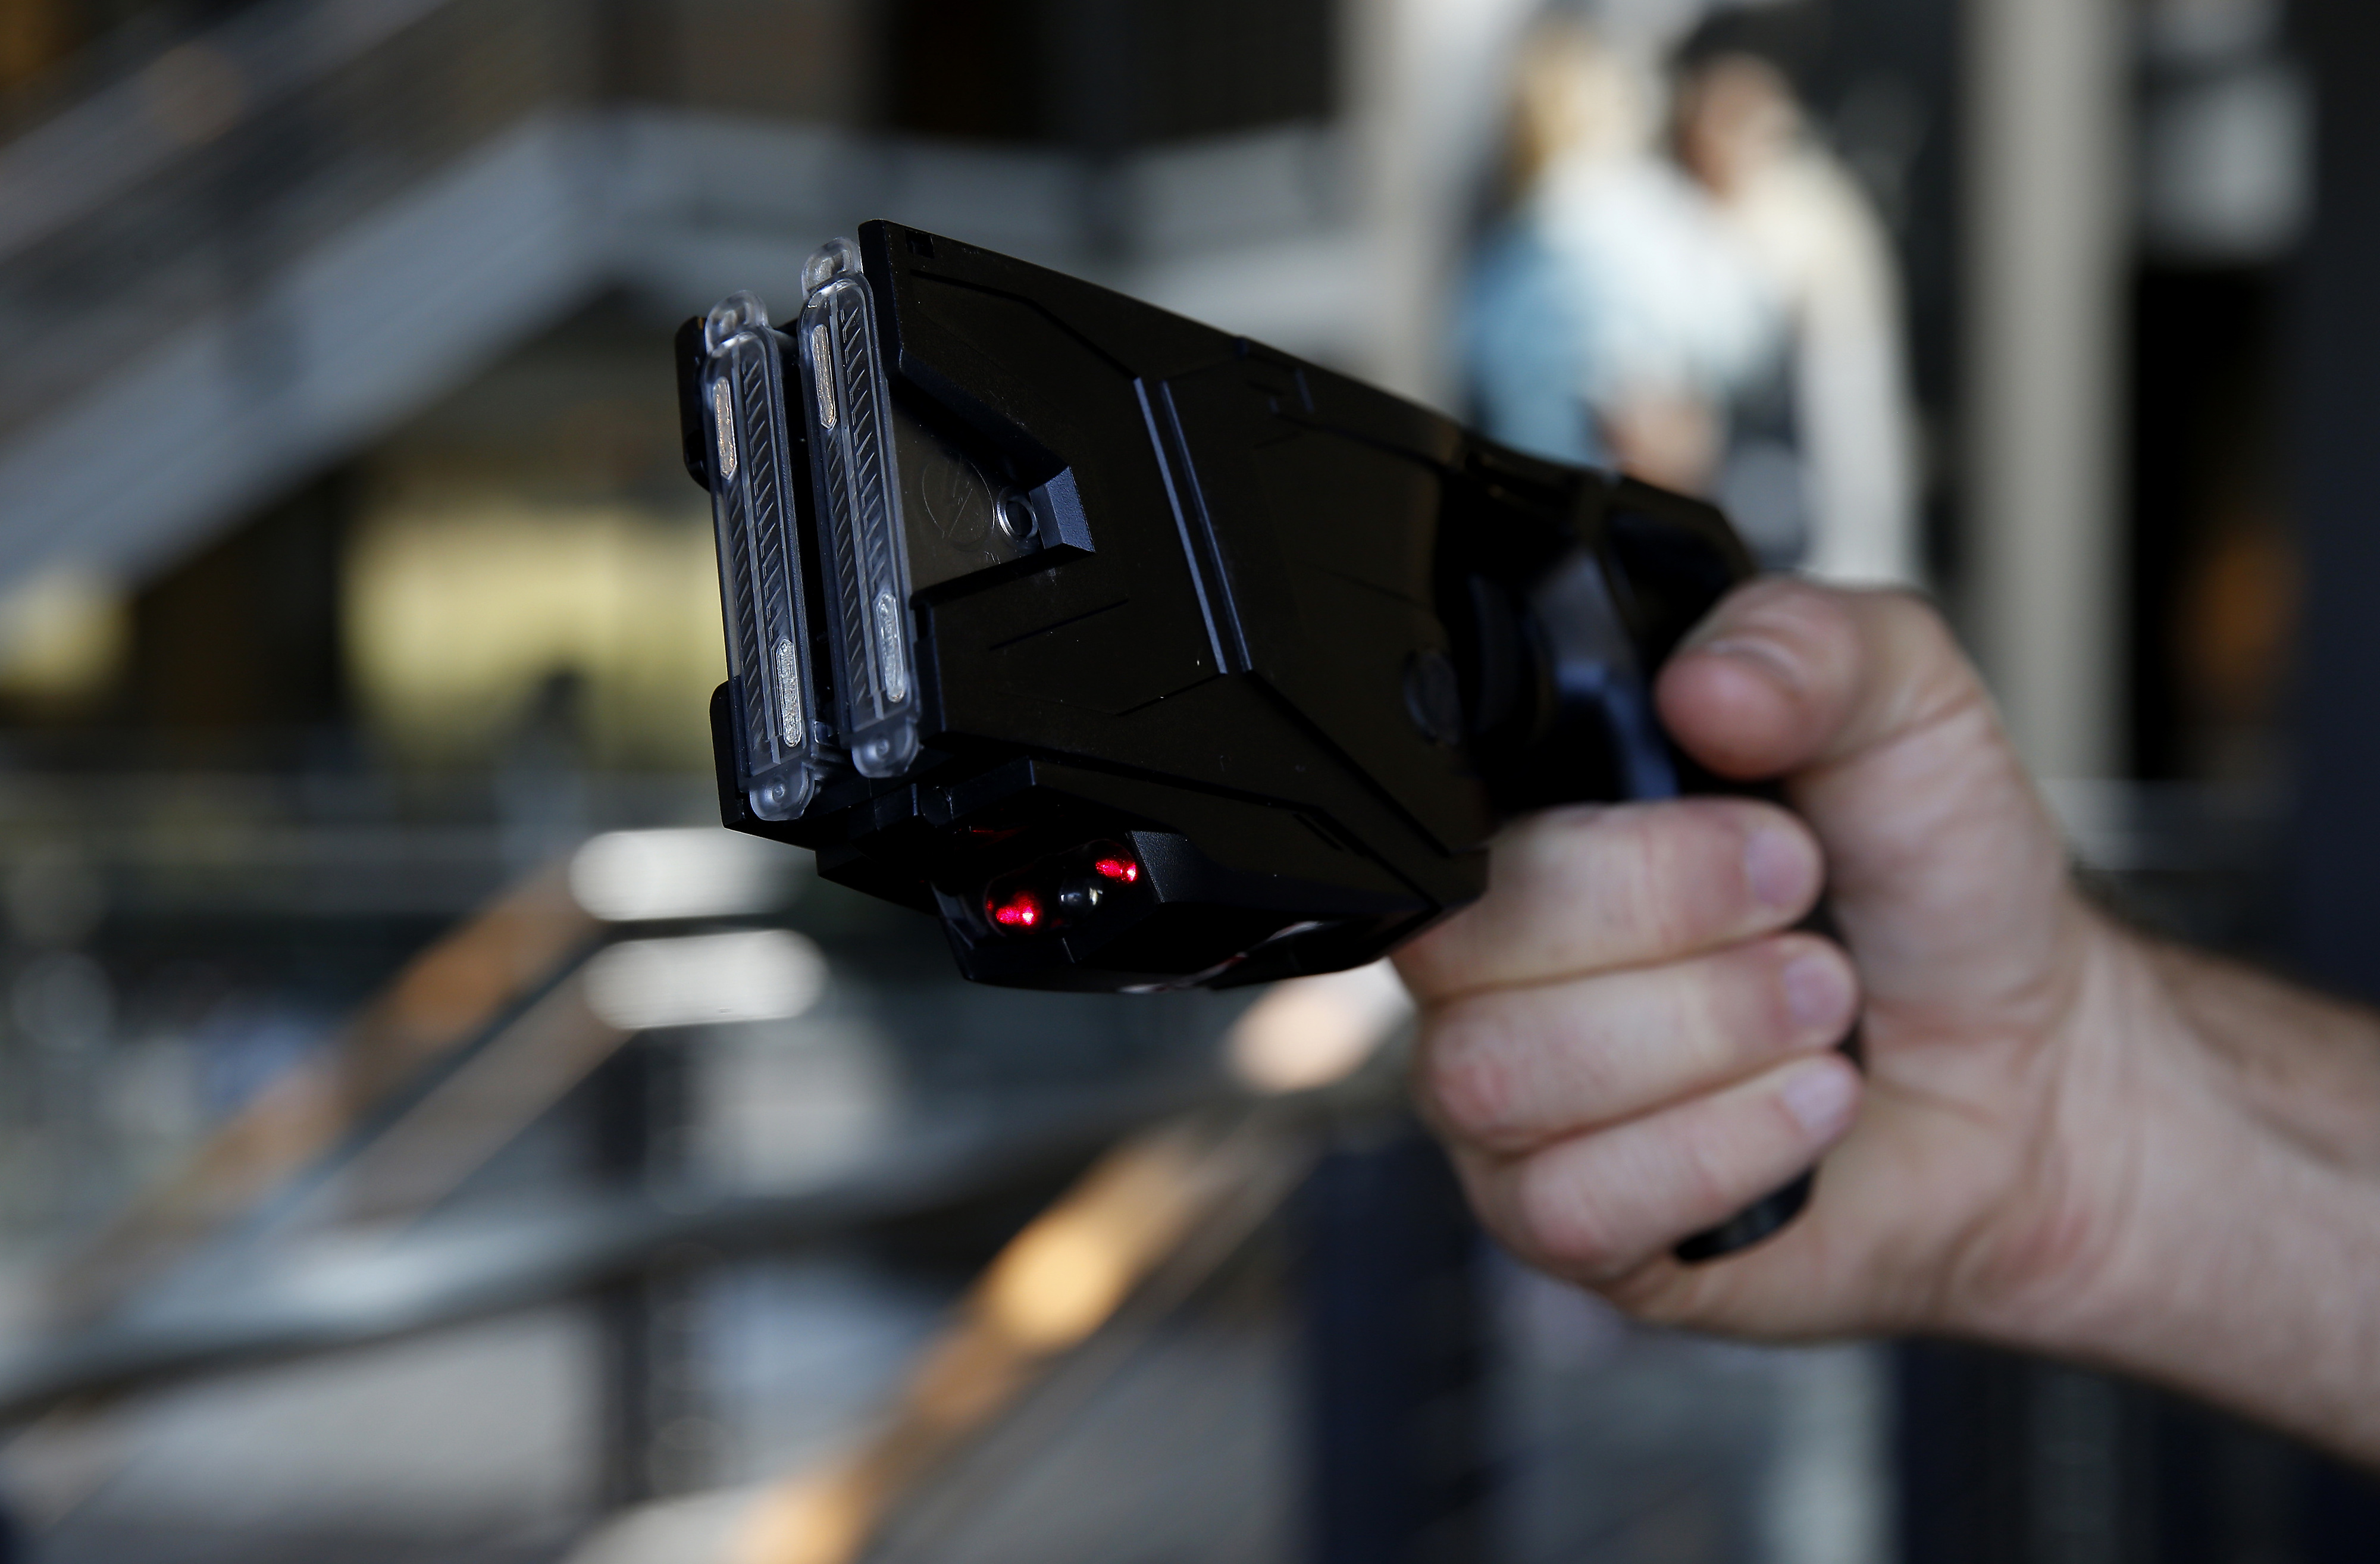 The Taser X2 electronic weapon arranged for a photograph at the Taser International headquarters in Scottsdale, Ariz., April 22, 2015 (Patrick T. Fallon—Bloomberg/Getty Images)